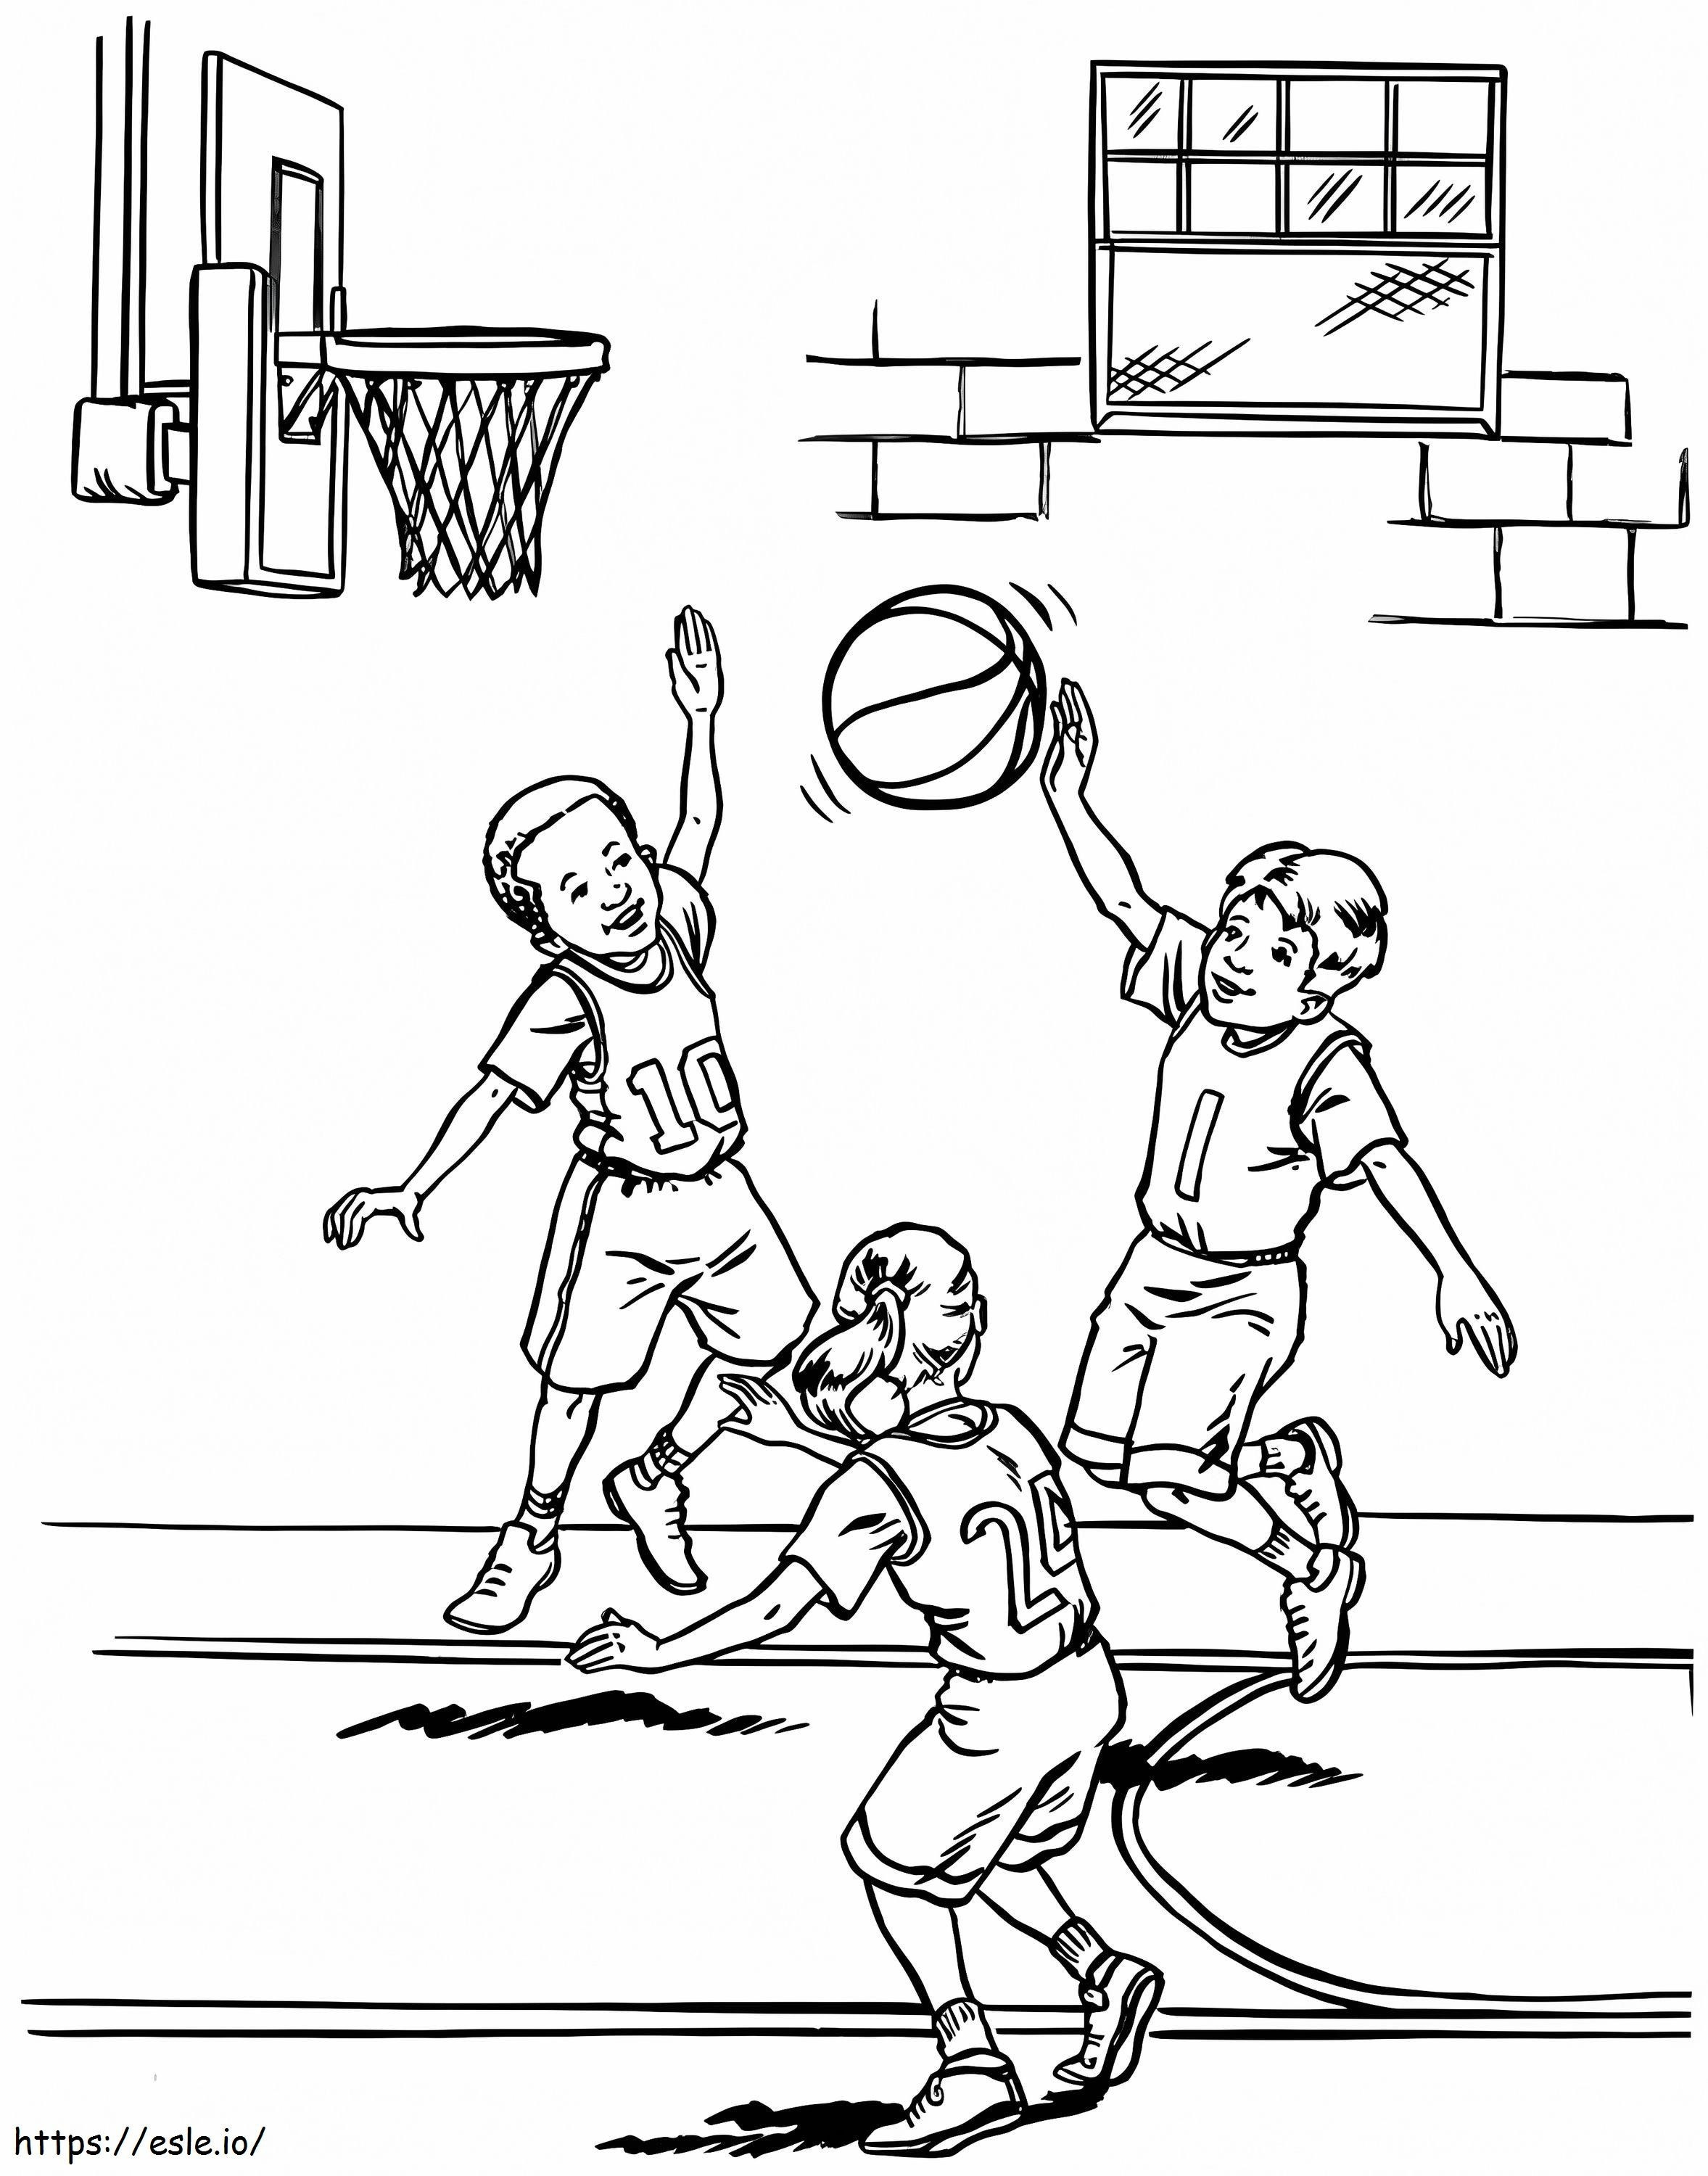 Three Children Playing Basketball coloring page